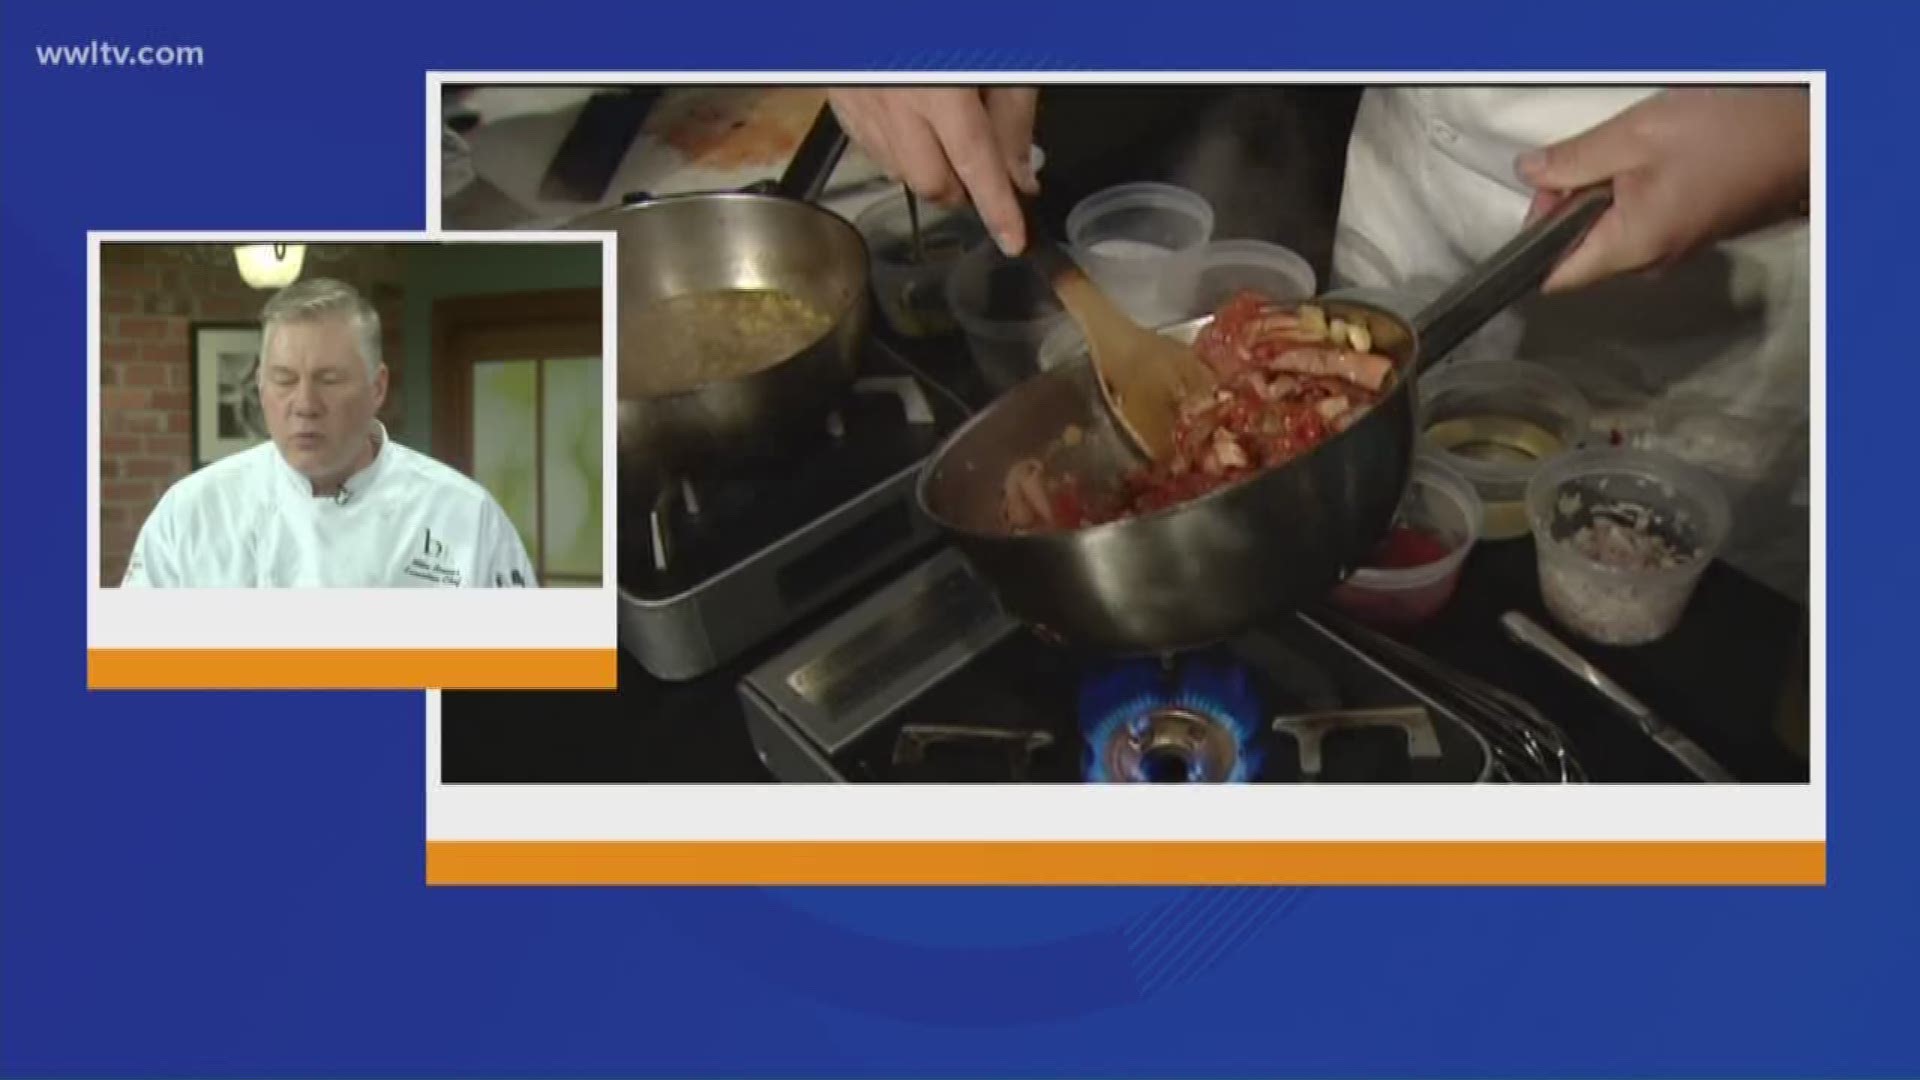 2015 King of Louisiana seafood, Chef Mike Brewer, is in the kitchen talking about the upcoming event.